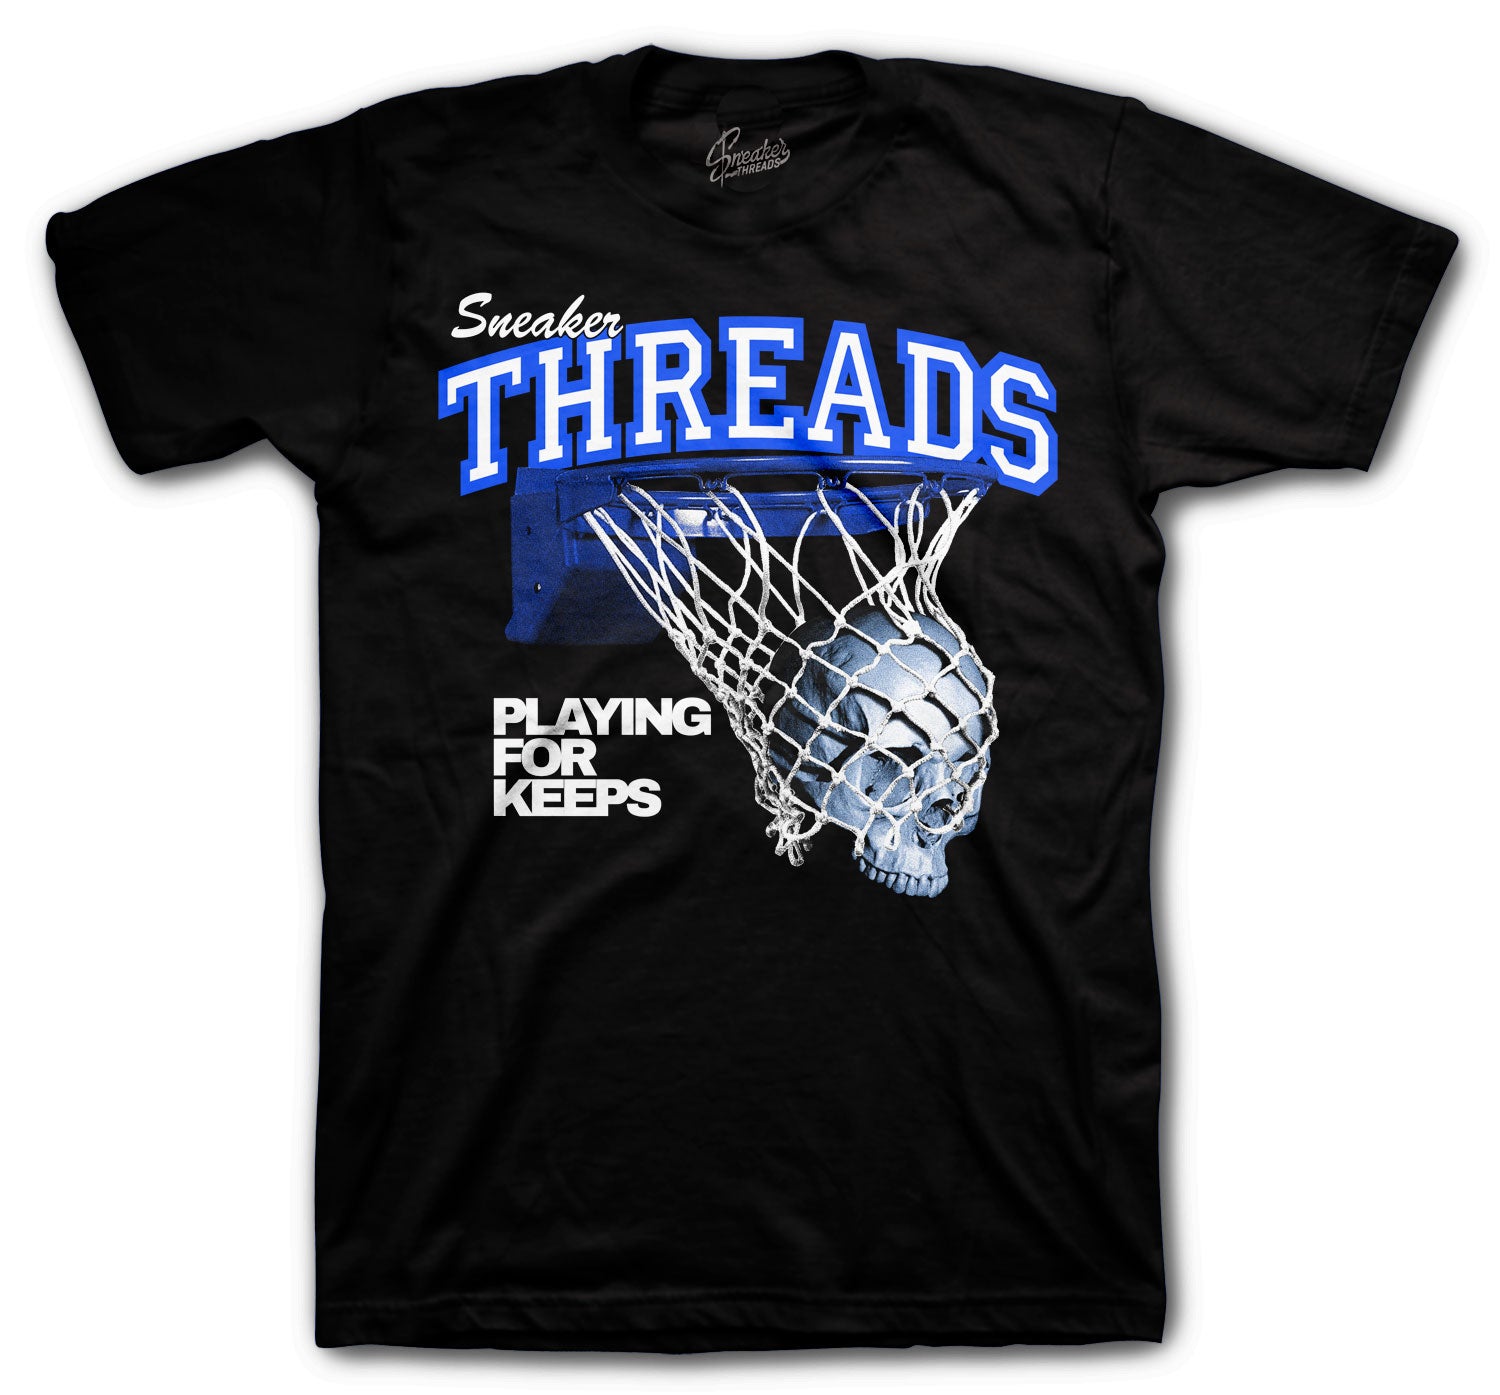 Retro 3 Racer Blue Shirt - Playing For Keeps- Black